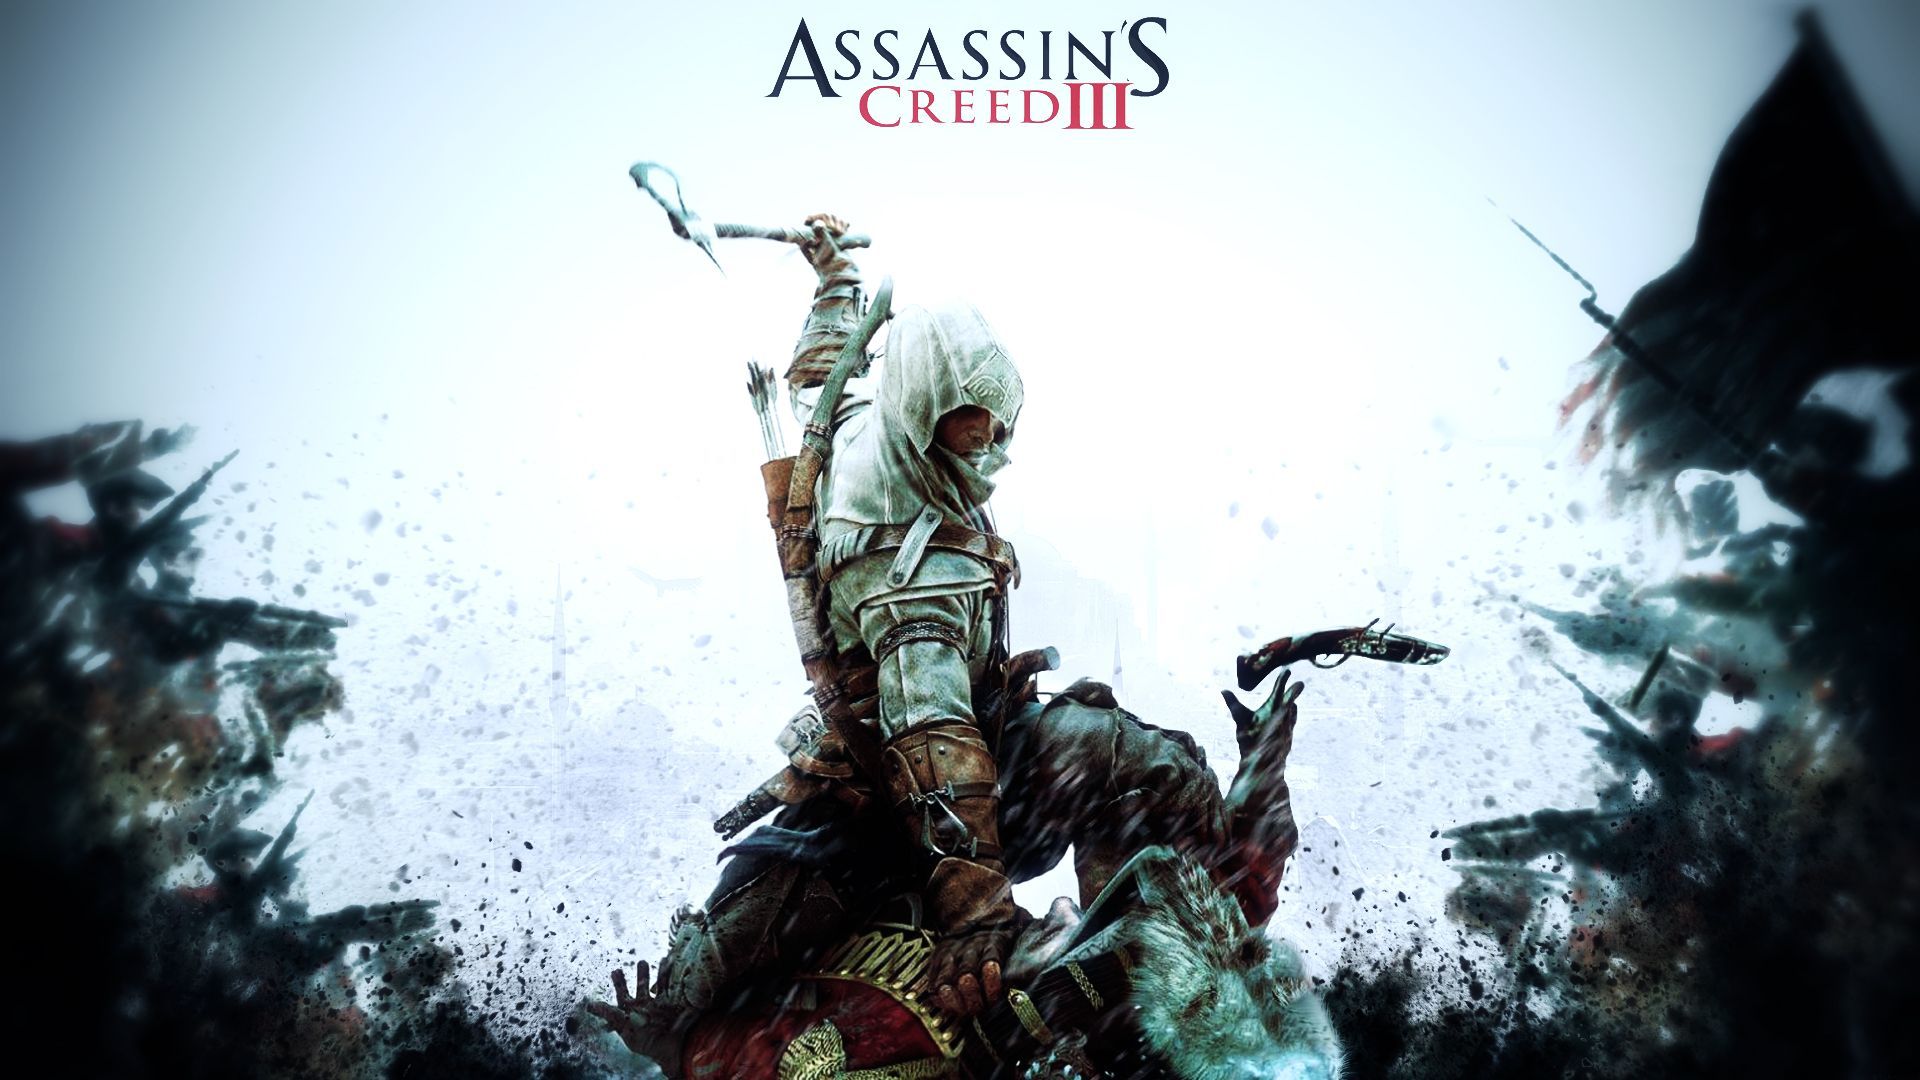 Assassins Creed 3 Wallpapers HD Backgrounds